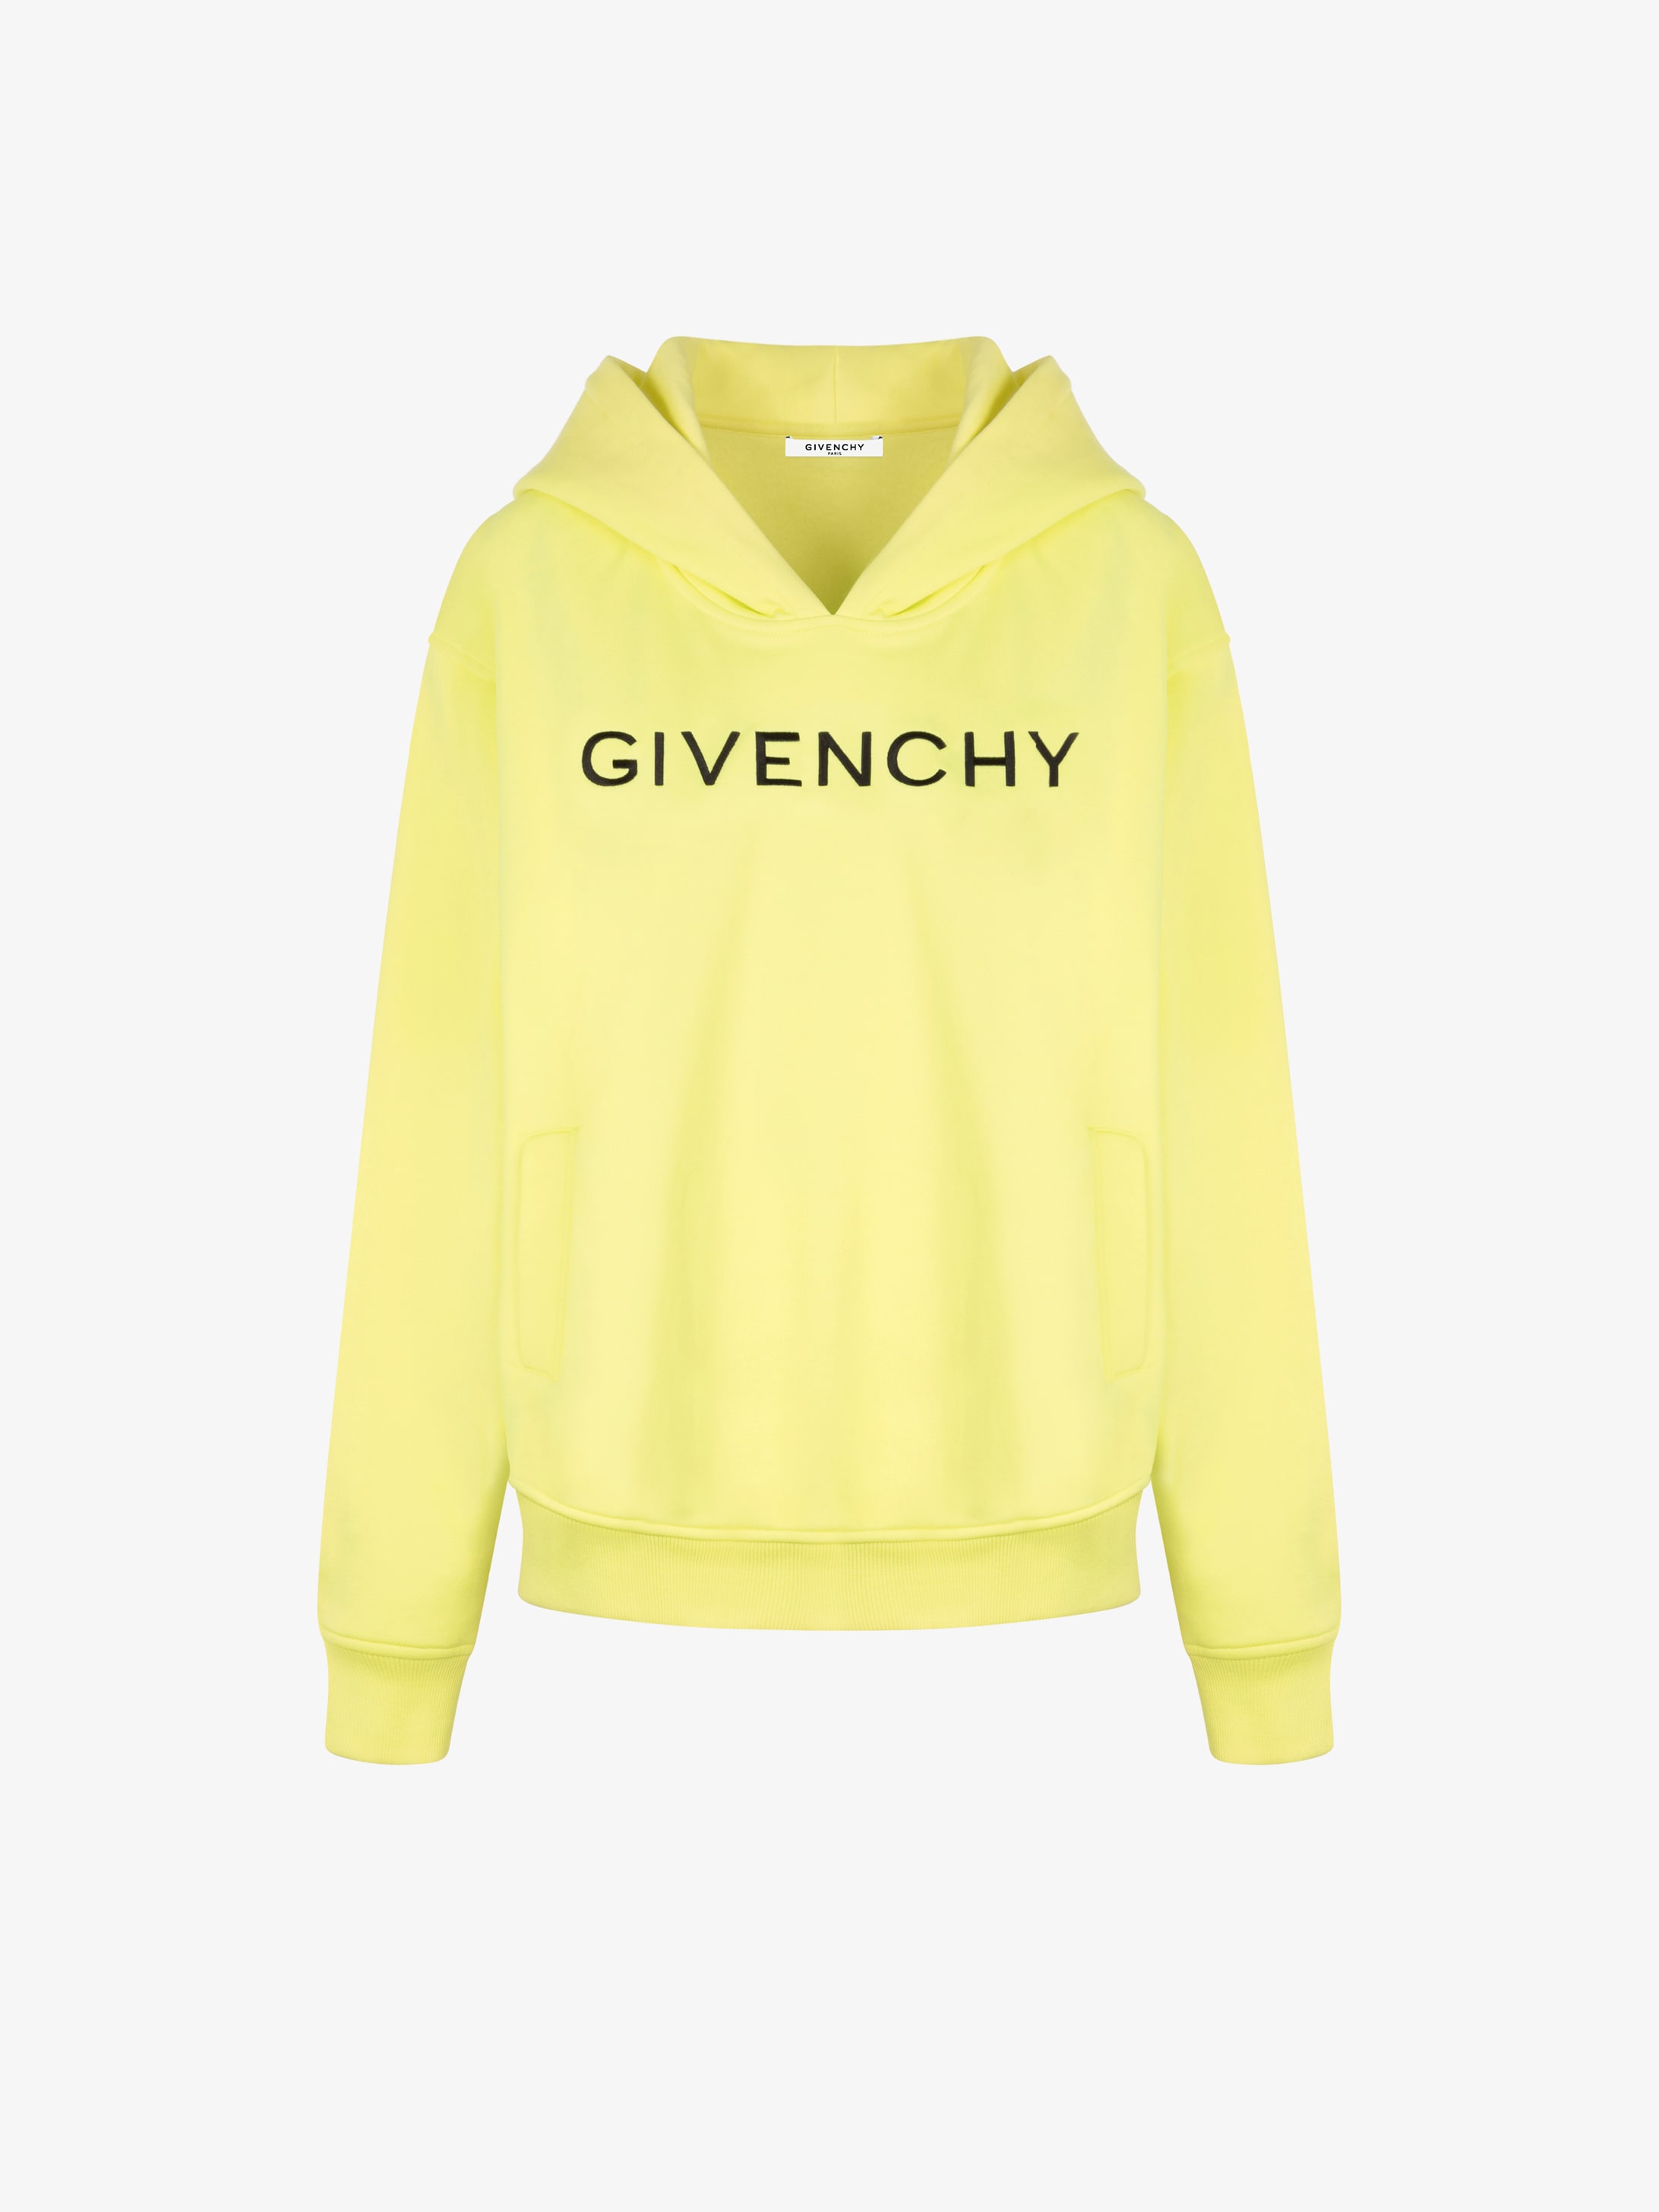 givenchy yellow